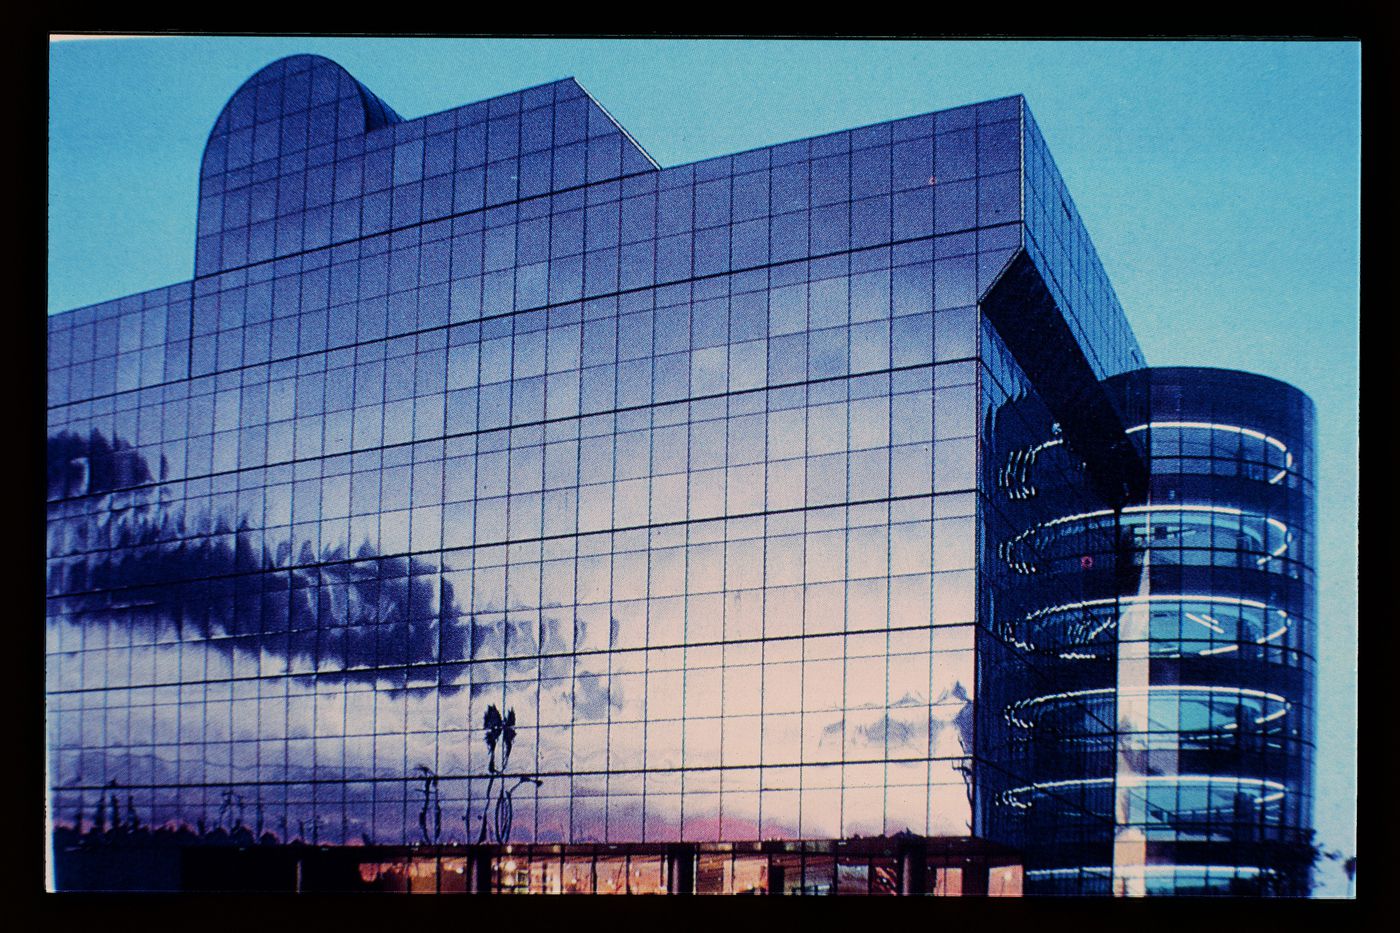 Slide of a photograph of Pacific Design Centre, Los Angeles, by Cesar Pelli